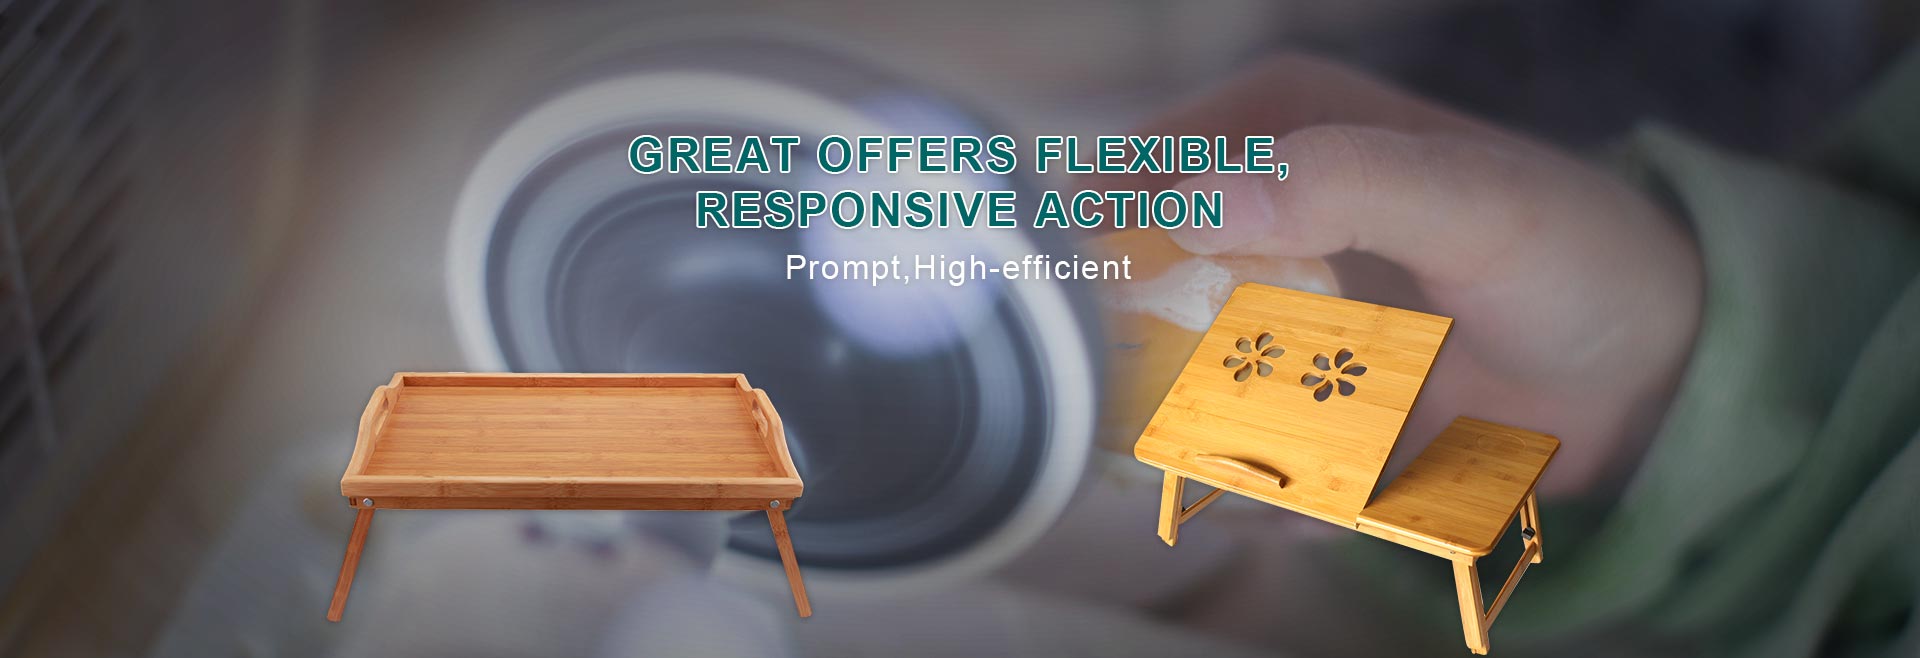 Parallax scrolling effect gives your slider the extra oomph it needs. banner不限张数